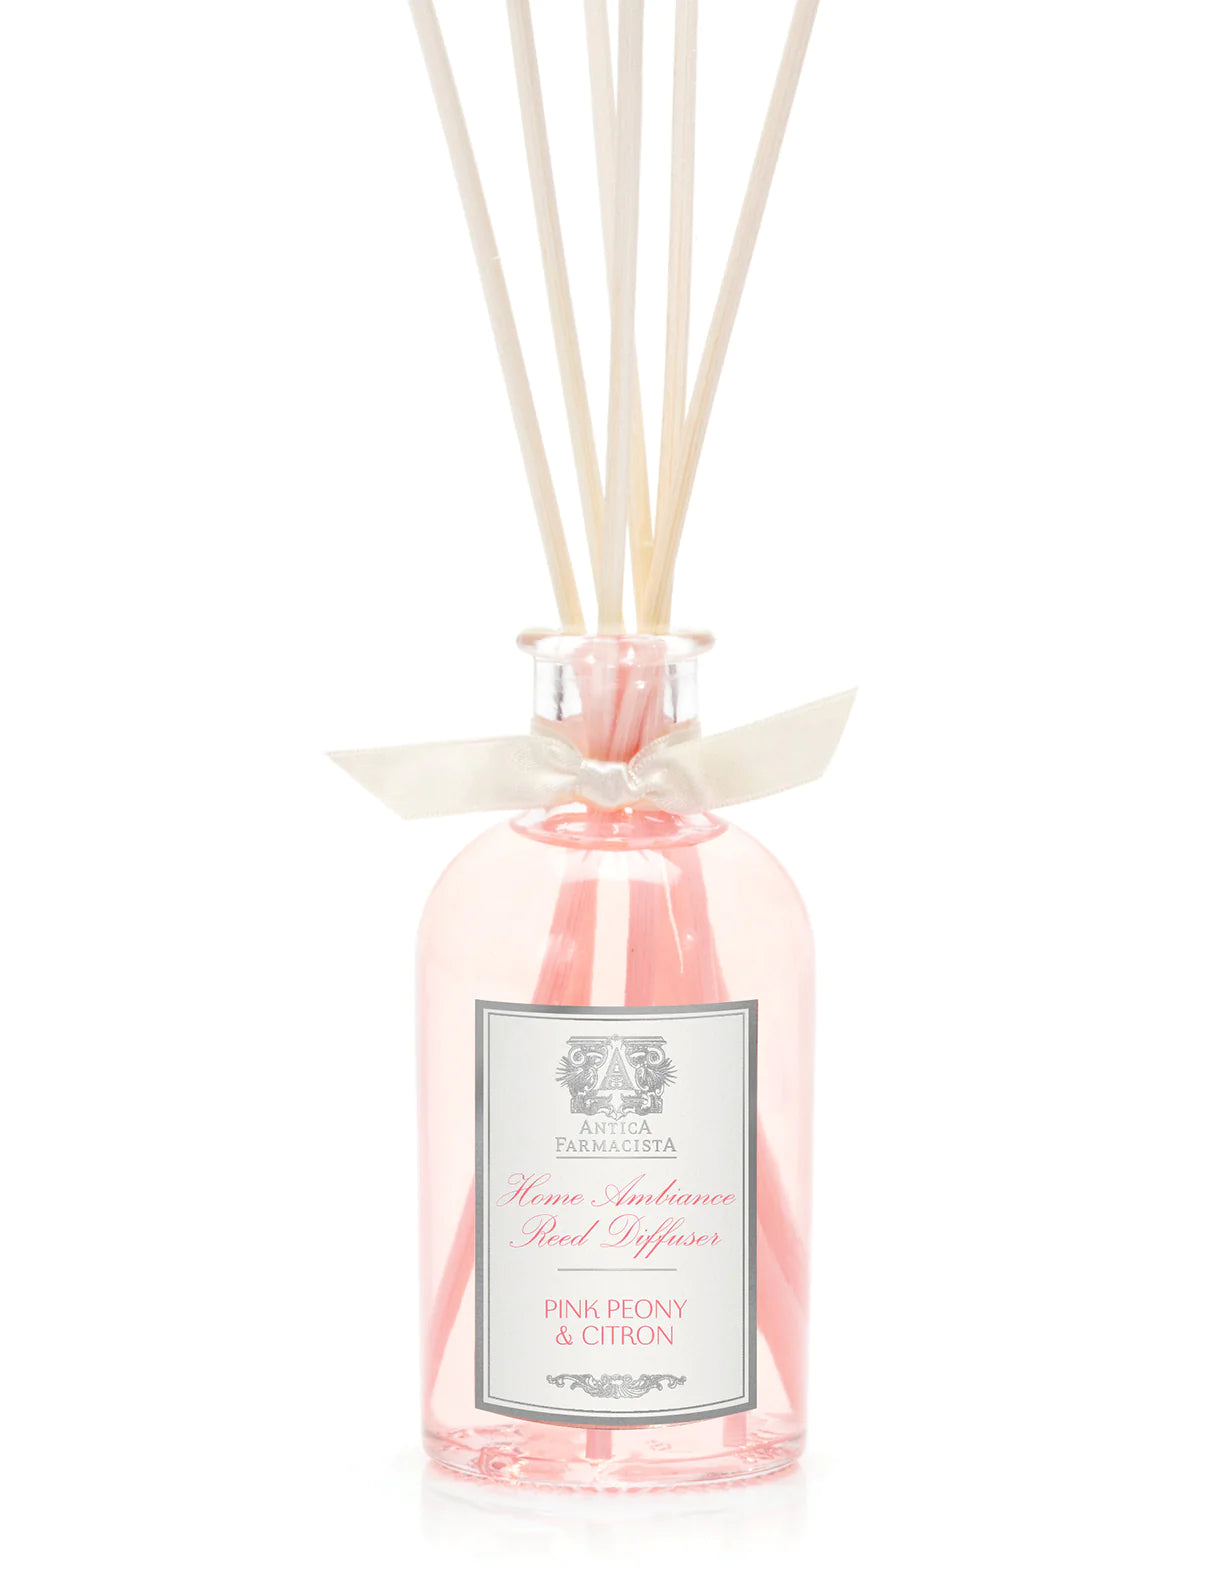 Antica Home Diffuser 100ml Scents in Pink Peony & Citron at Wrapsody